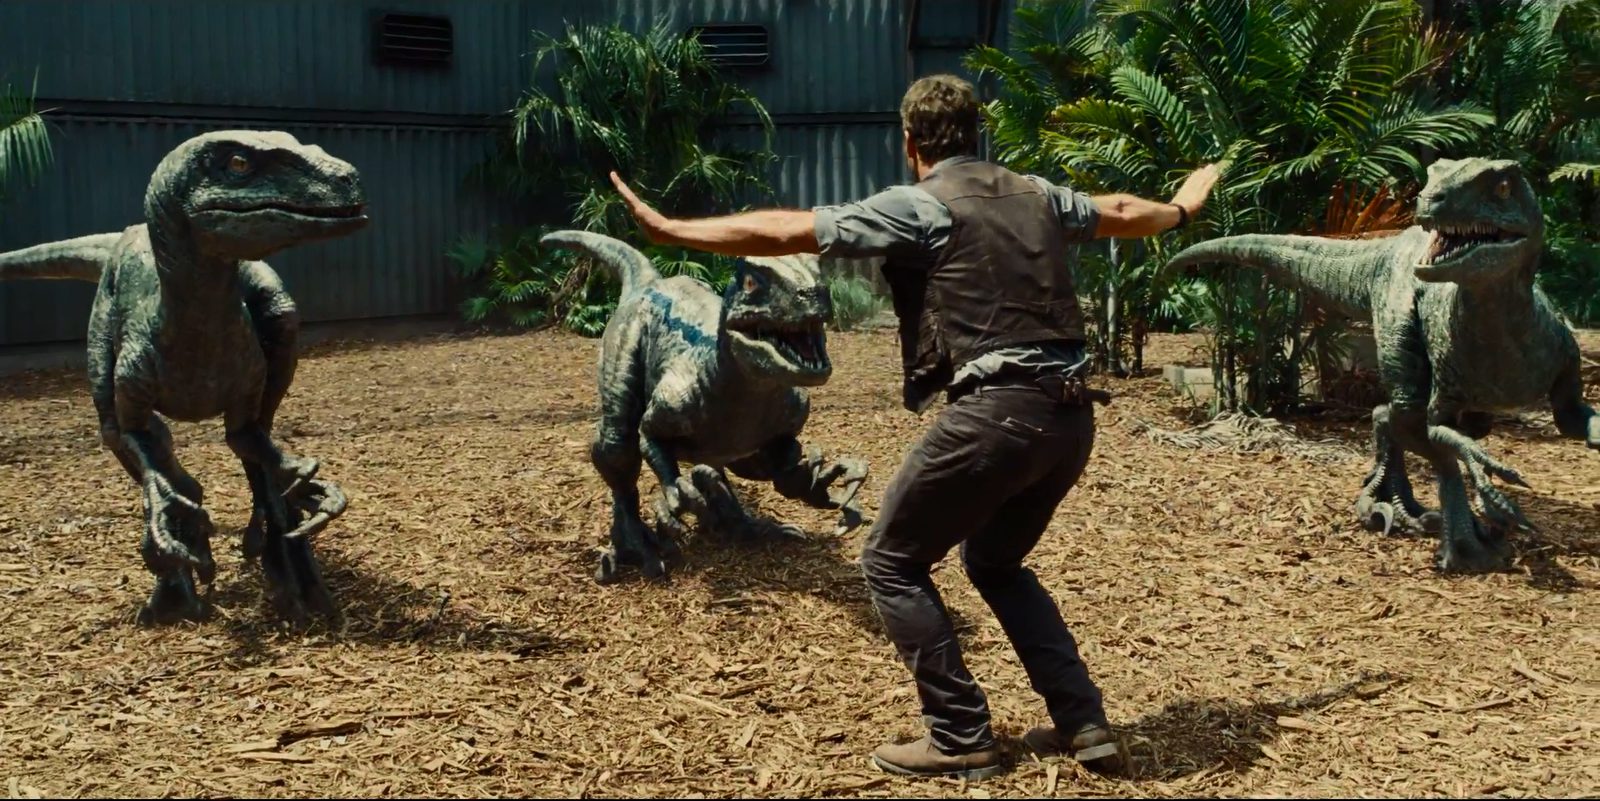 What Would Be Your Job In Jurassic World?